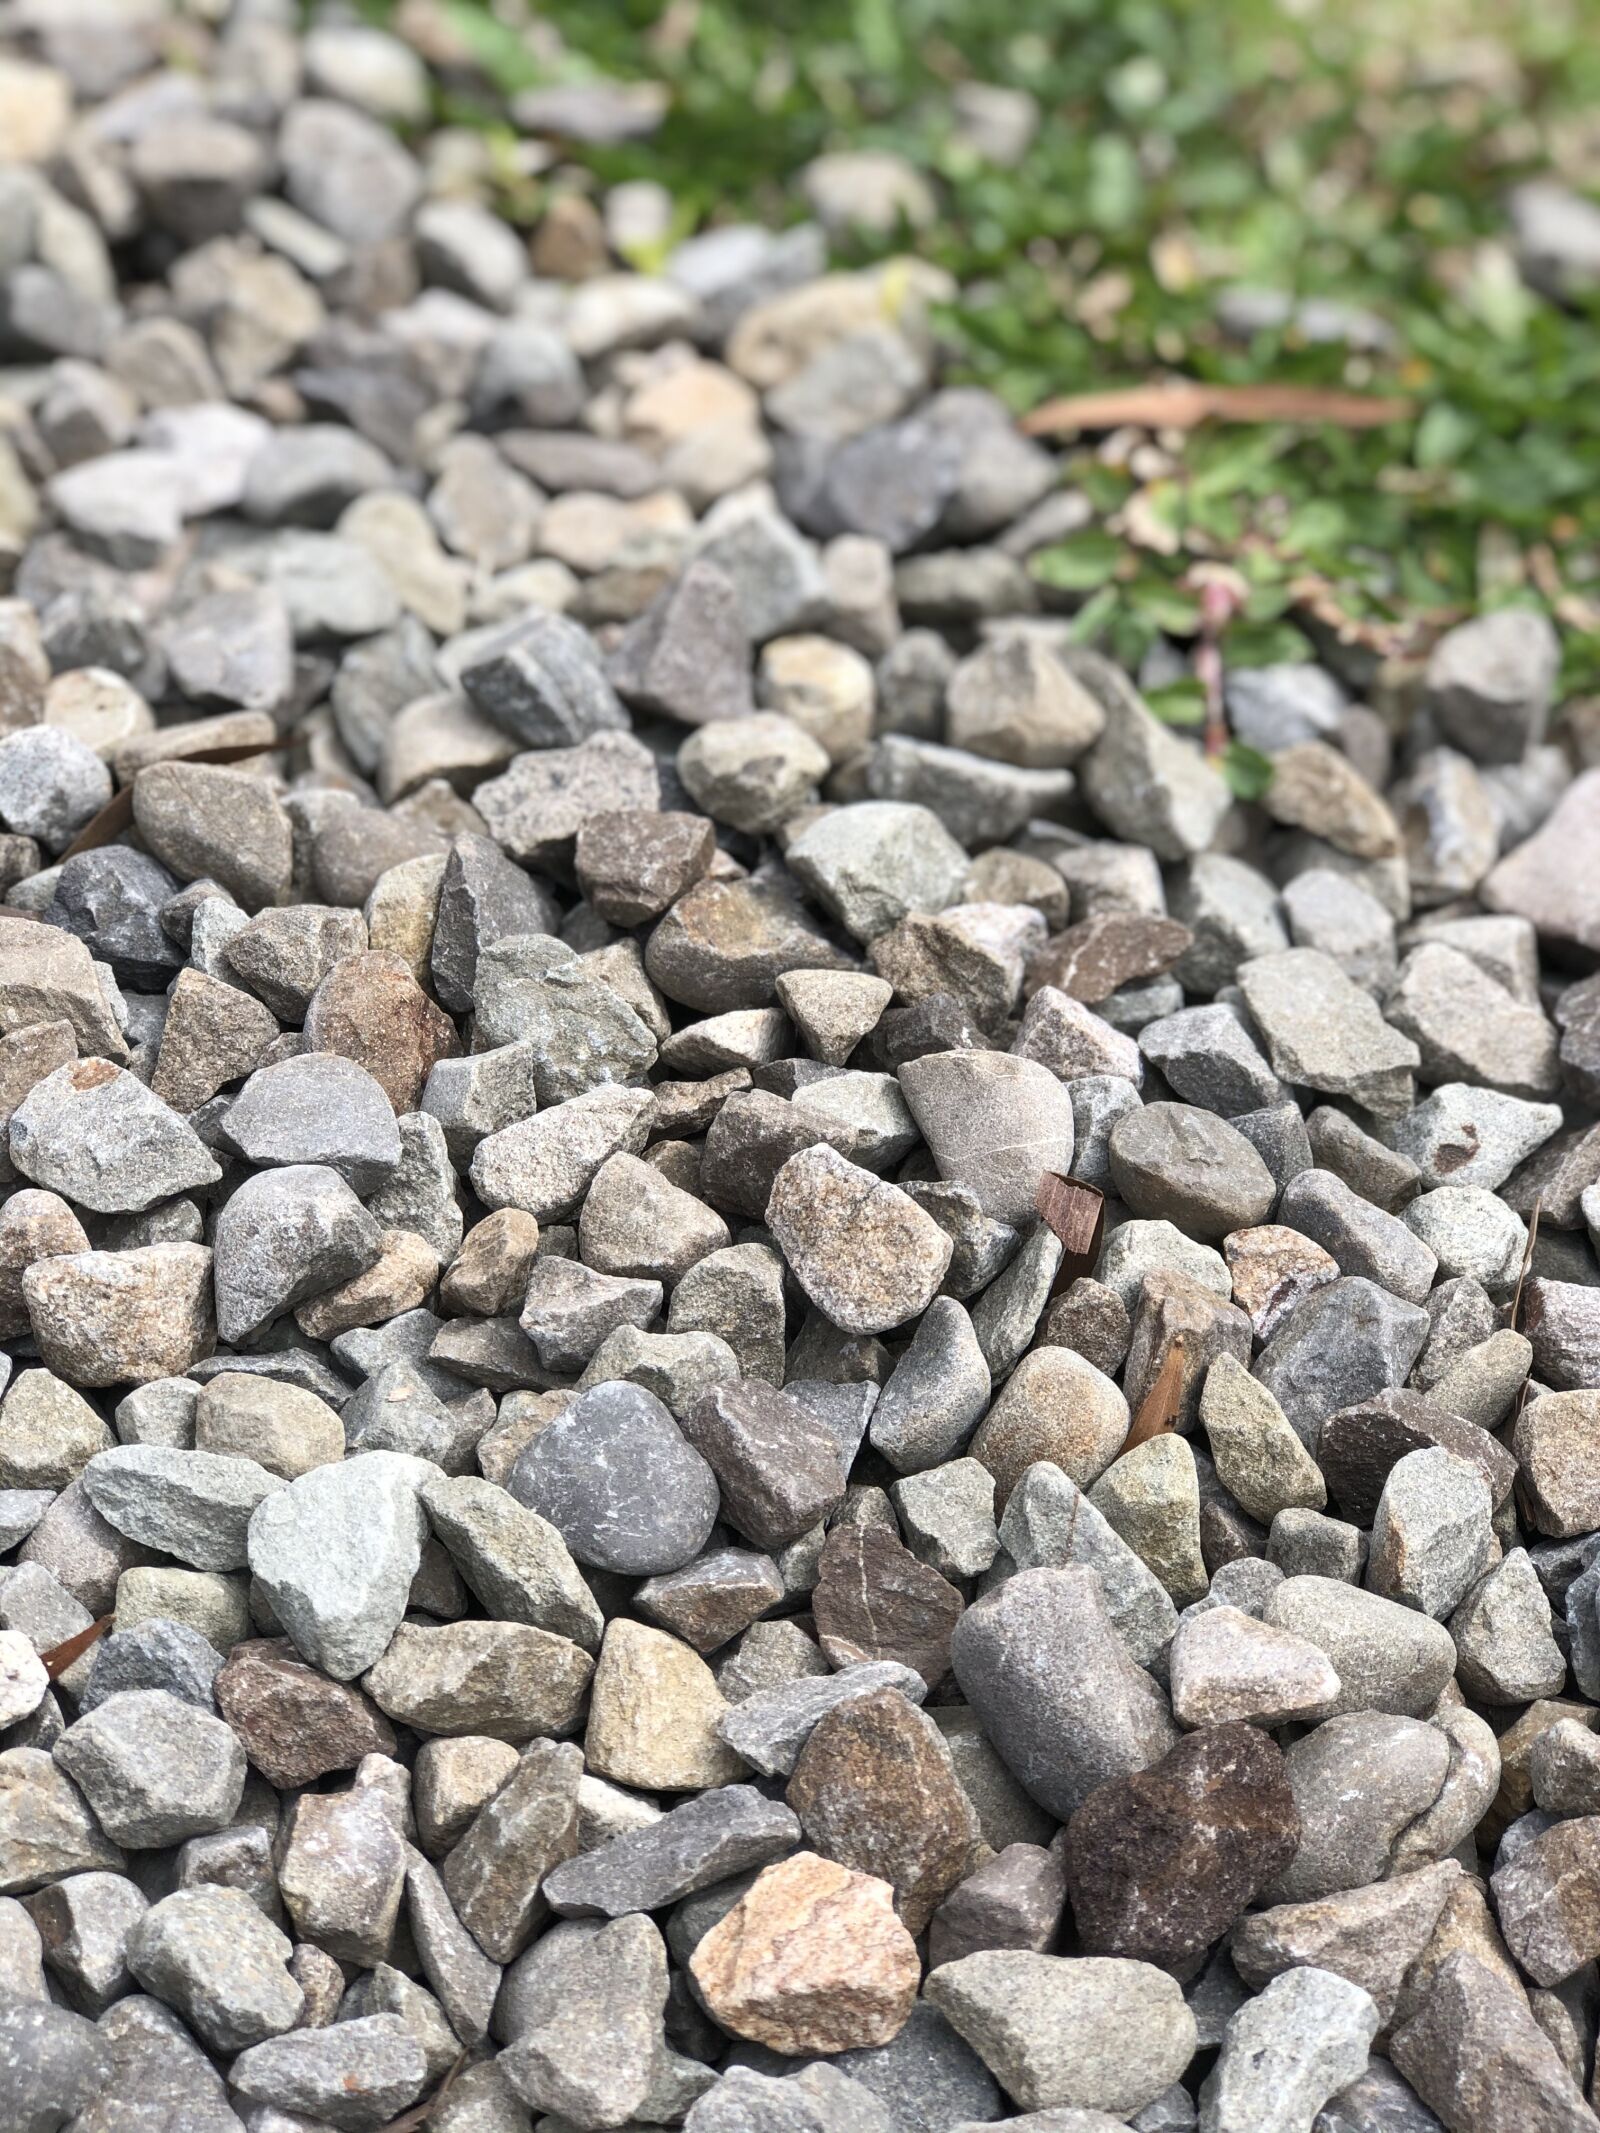 Apple iPhone 8 Plus + iPhone 8 Plus back dual camera 6.6mm f/2.8 sample photo. Pebbles, grass, nature photography